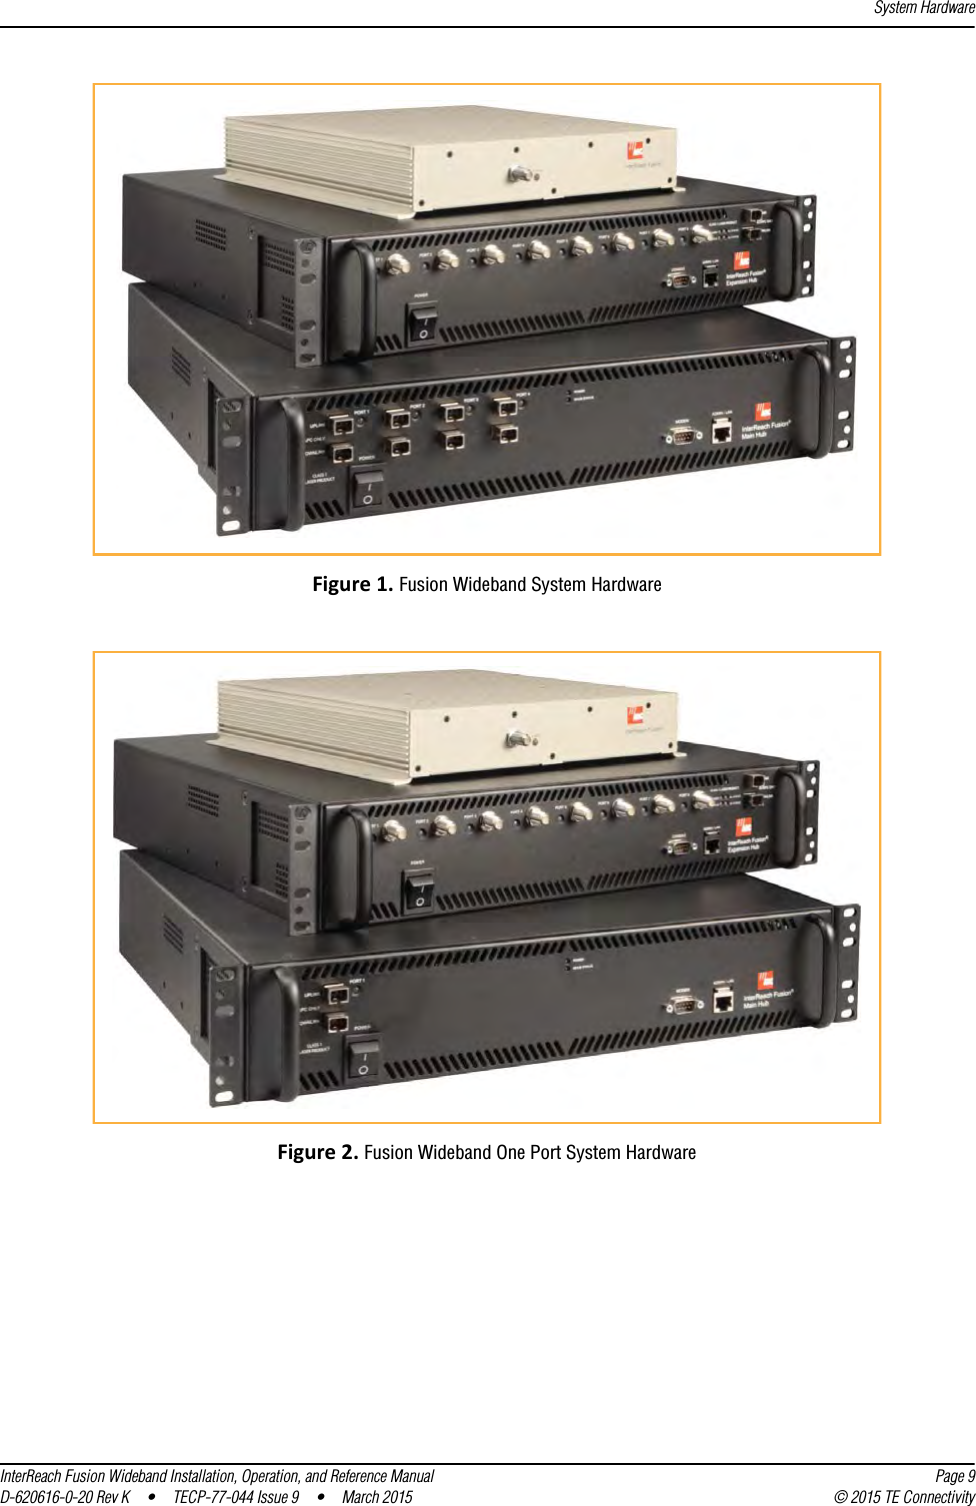 System HardwareInterReach Fusion Wideband Installation, Operation, and Reference Manual Page 9D-620616-0-20 Rev K  •  TECP-77-044 Issue 9  •  March 2015 © 2015 TE ConnectivityFigure 1. Fusion Wideband System HardwareFigure 2. Fusion Wideband One Port System Hardware